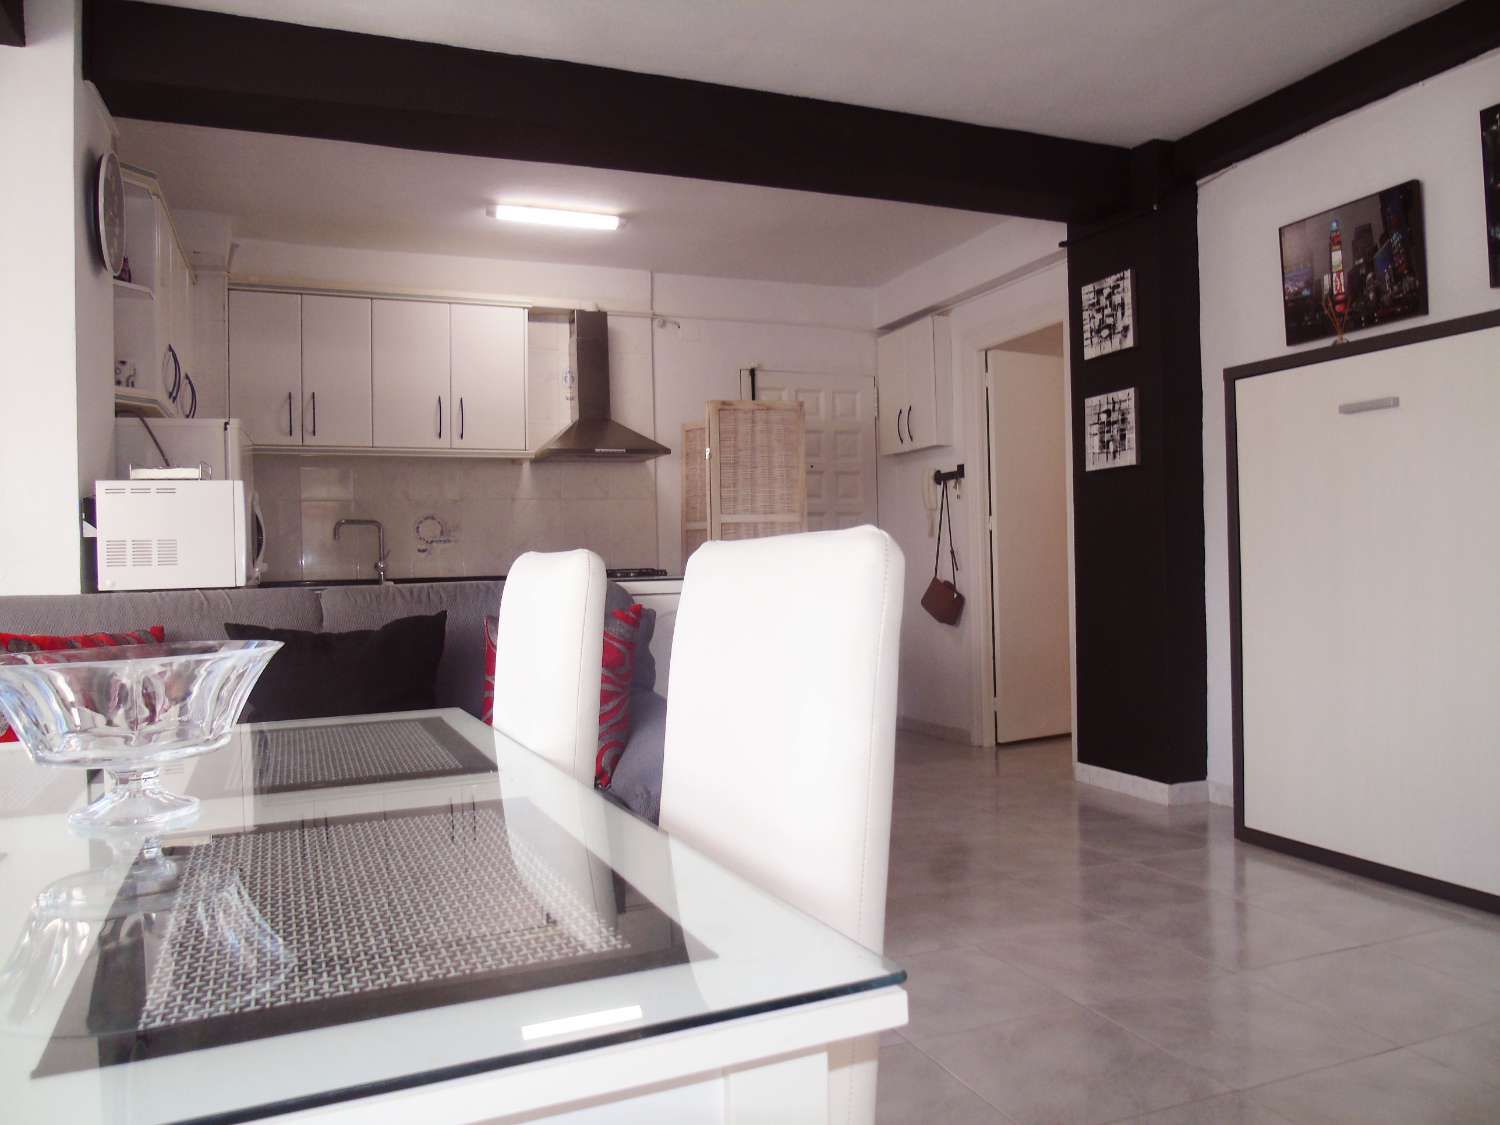 1 bedroom apartment in the center of Torre del Mar, with communal pool